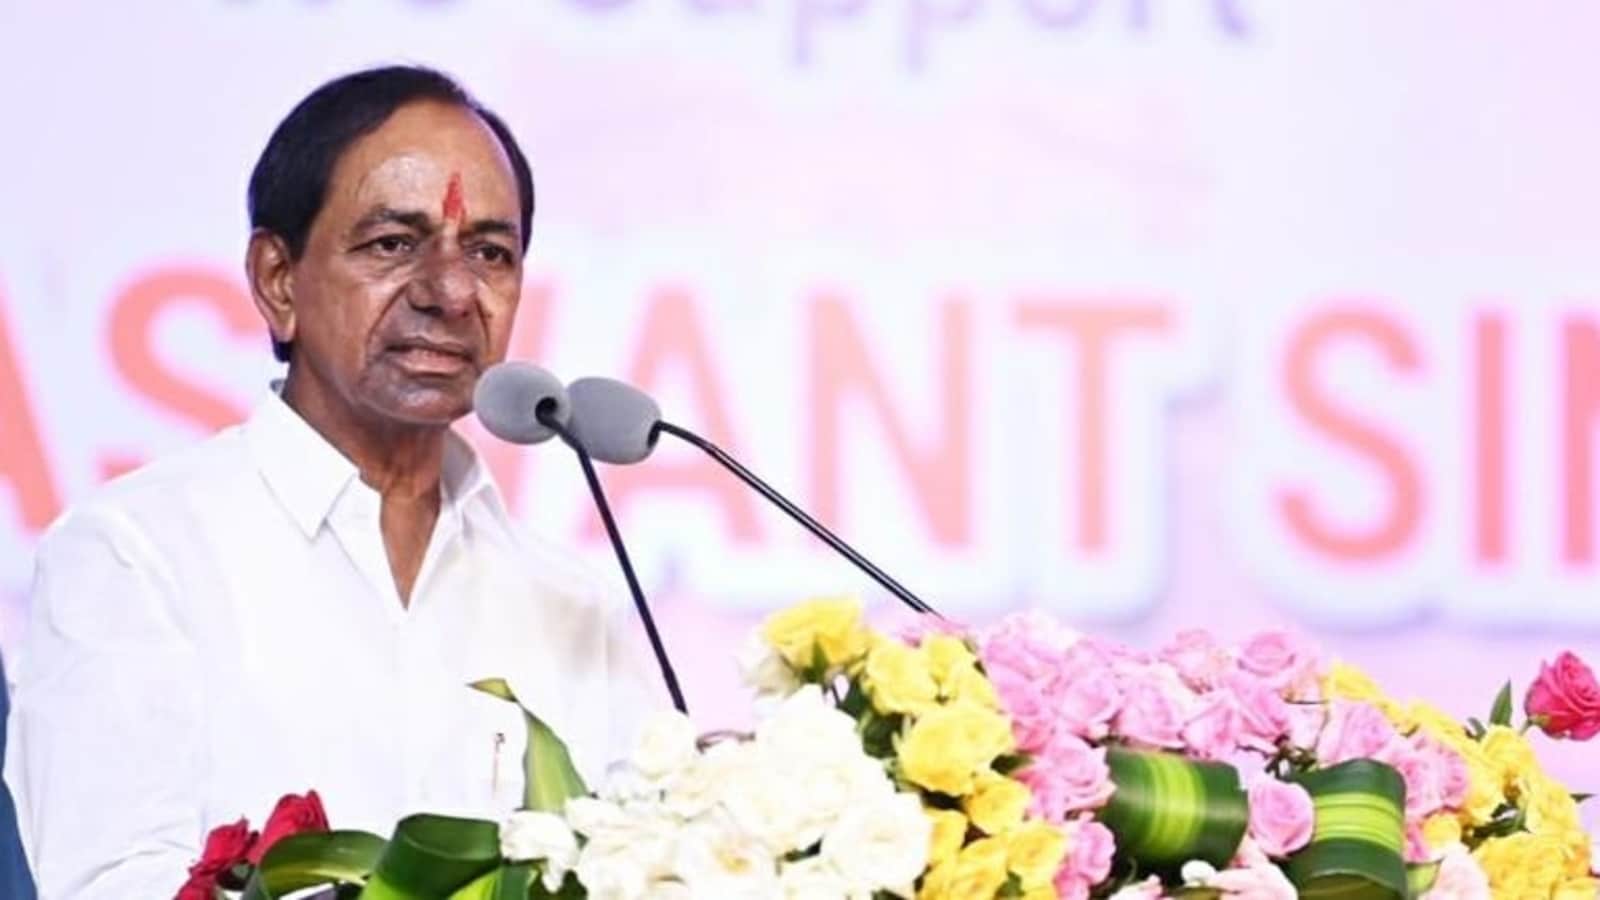 KCR winds up TRS, floats new national party ahead of 2024